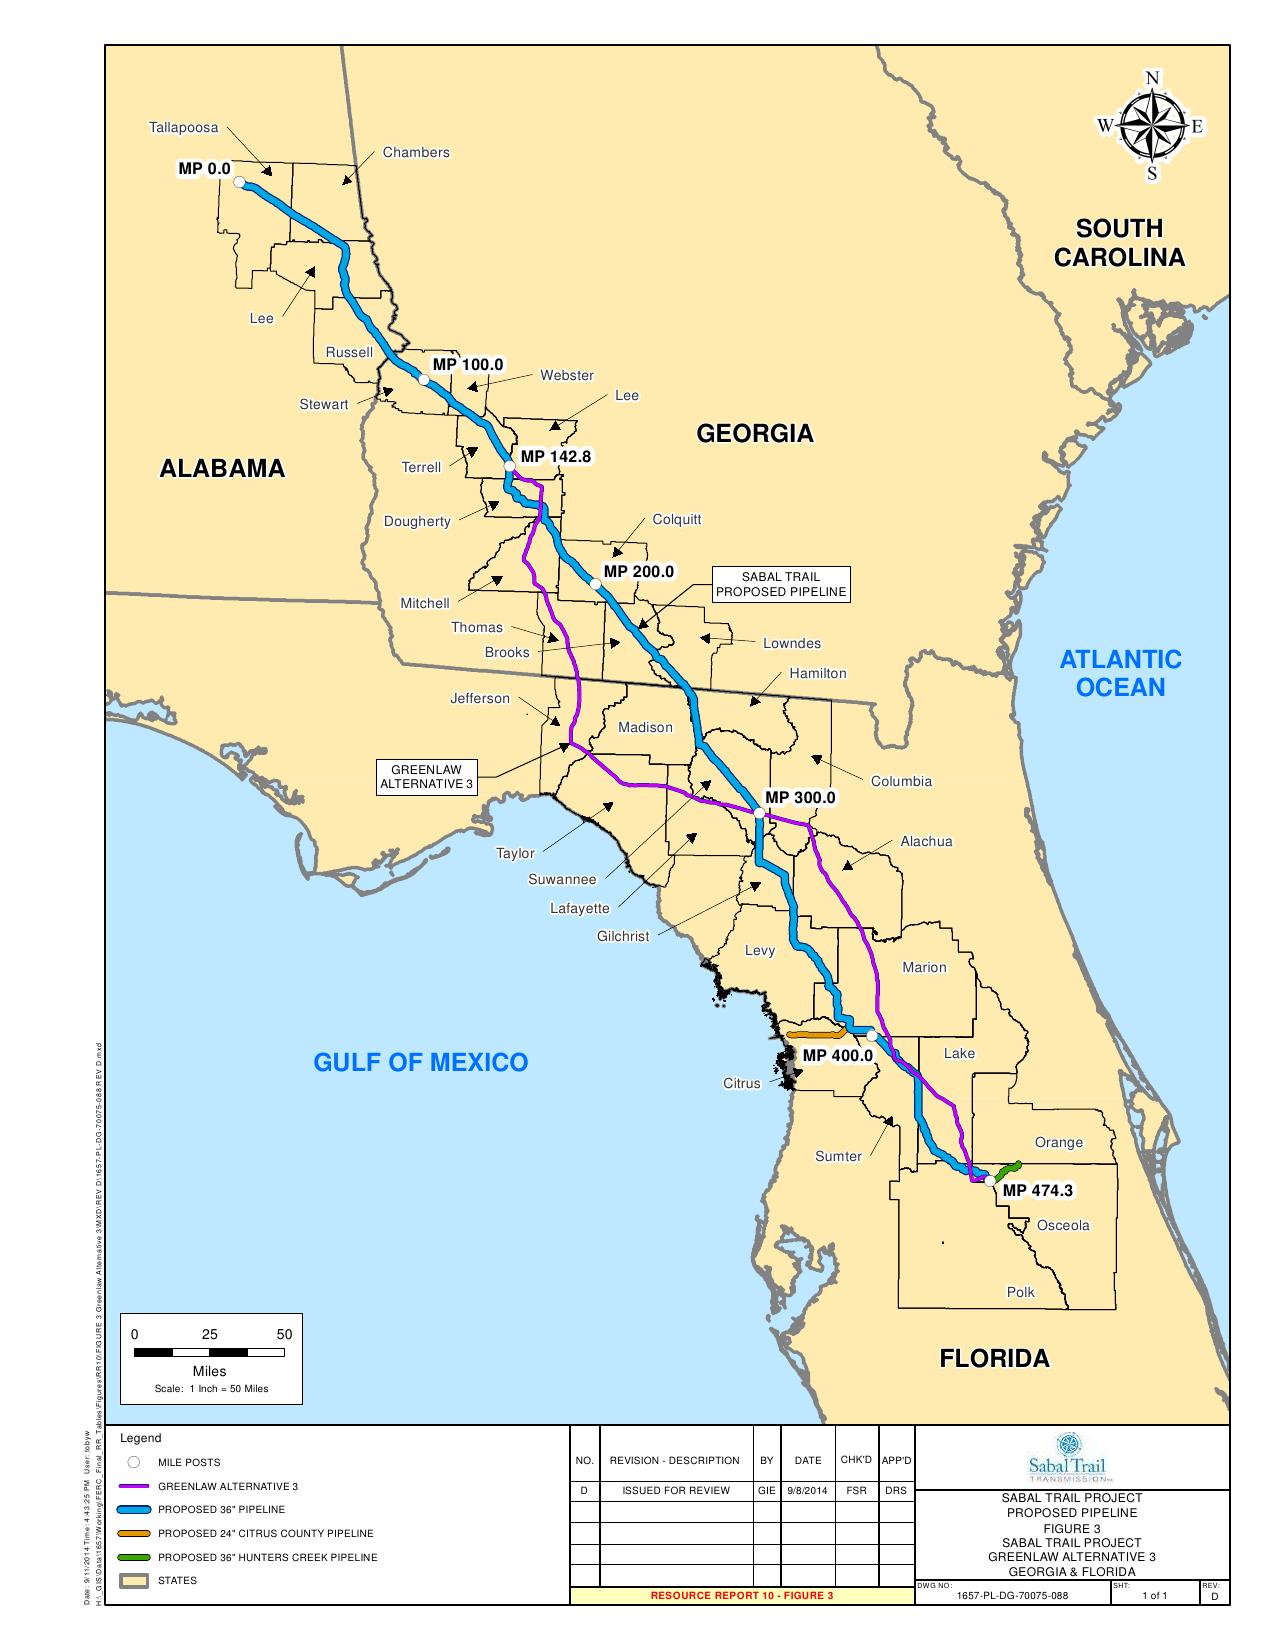 1275x1650 GreenLaw Alternative 3, in Response to FERC directive of 26 August 2014, by Sabal Trail Transmission, for SpectraBusters.org, 15 September 2014